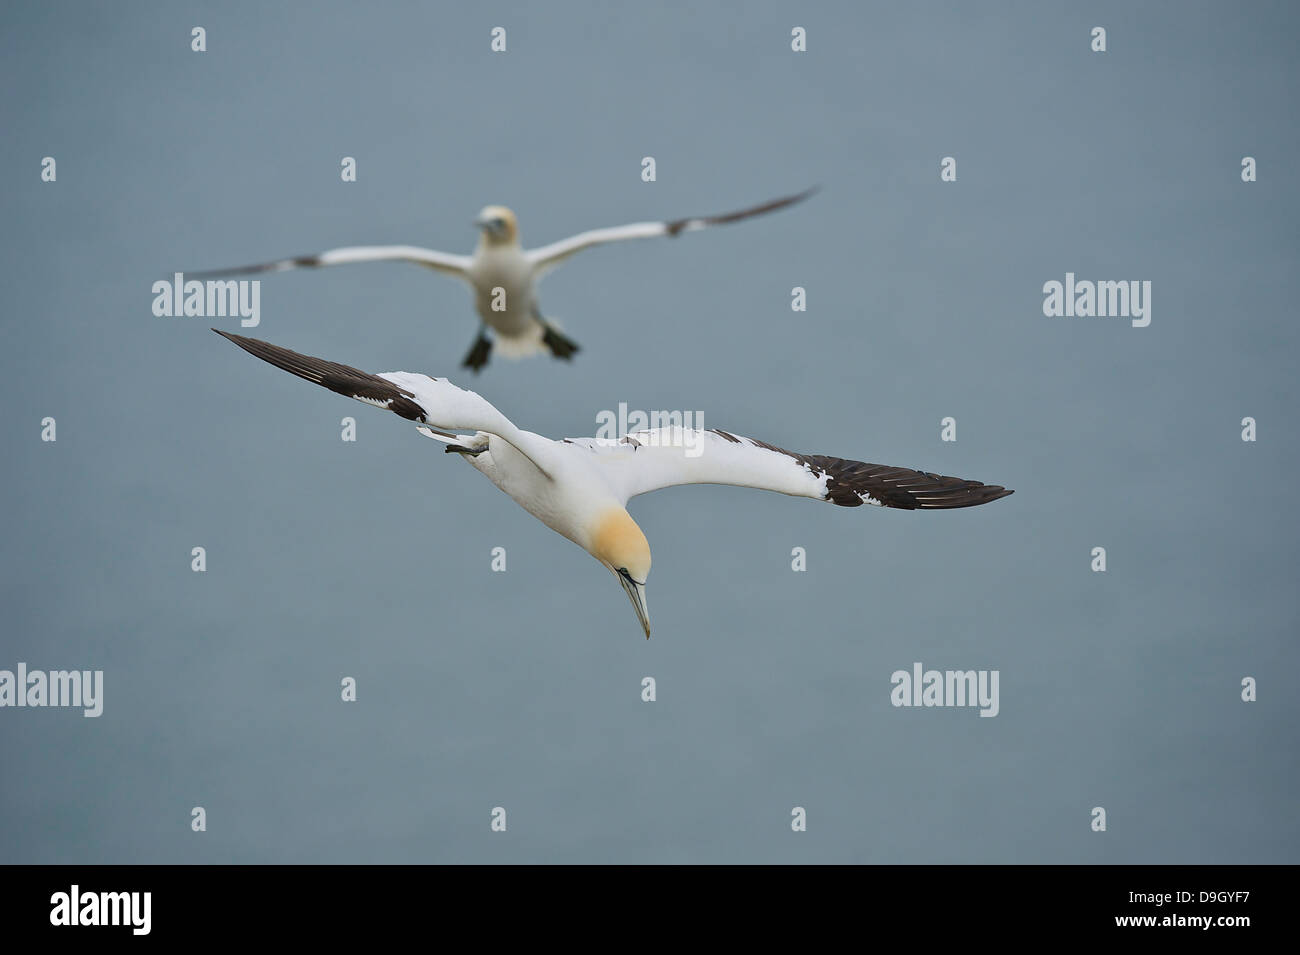 A juvenile Northern Gannet soars above the North Sea. Another gannet is defocused in the background. Stock Photo